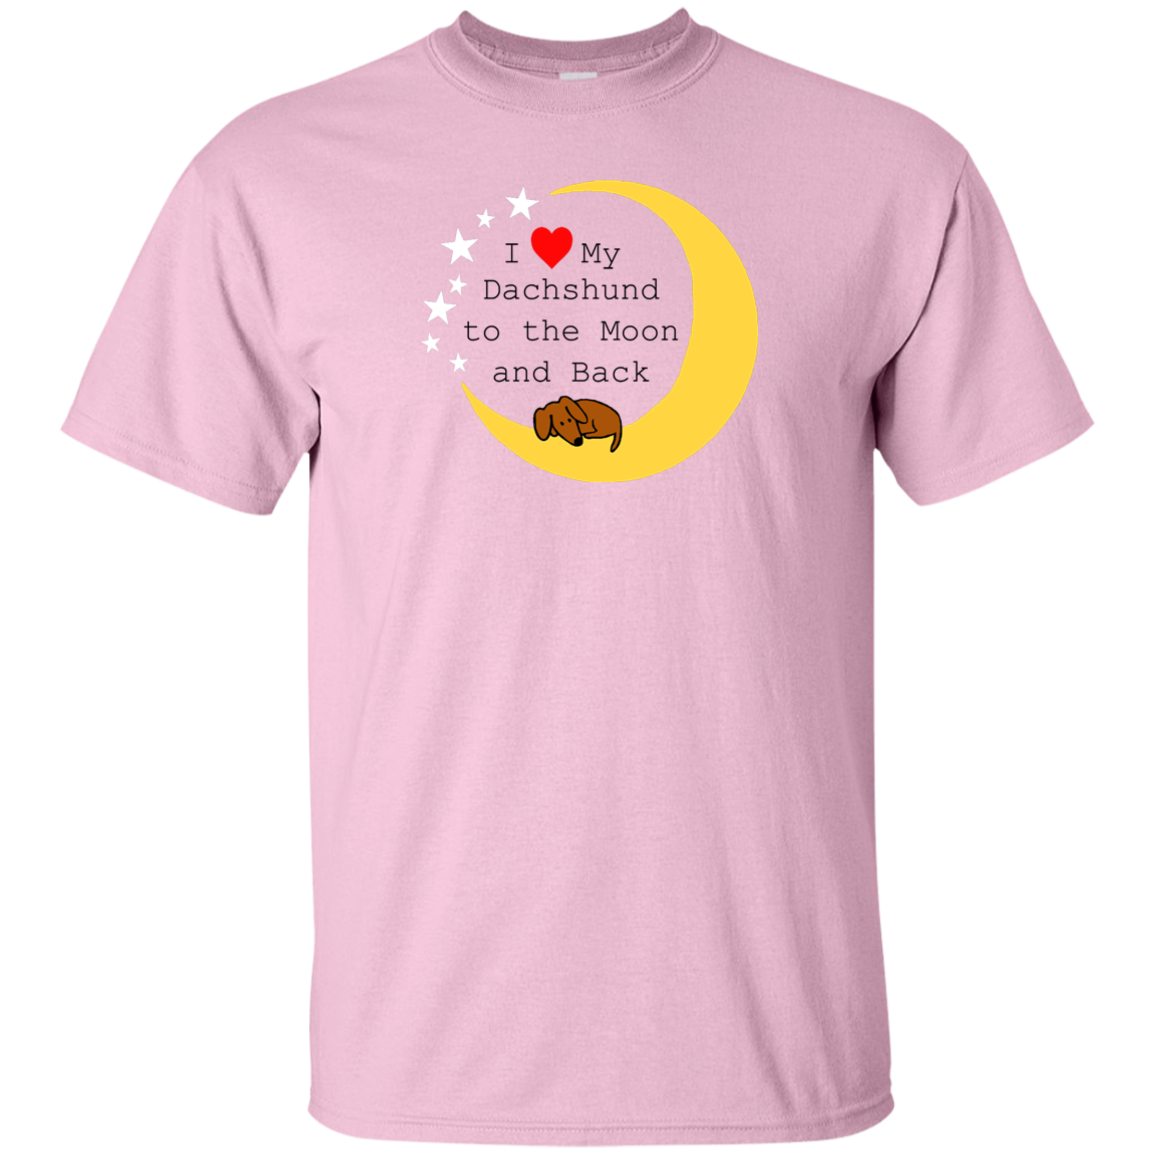 I Love My Dachshund To The Moon and Back Shirts